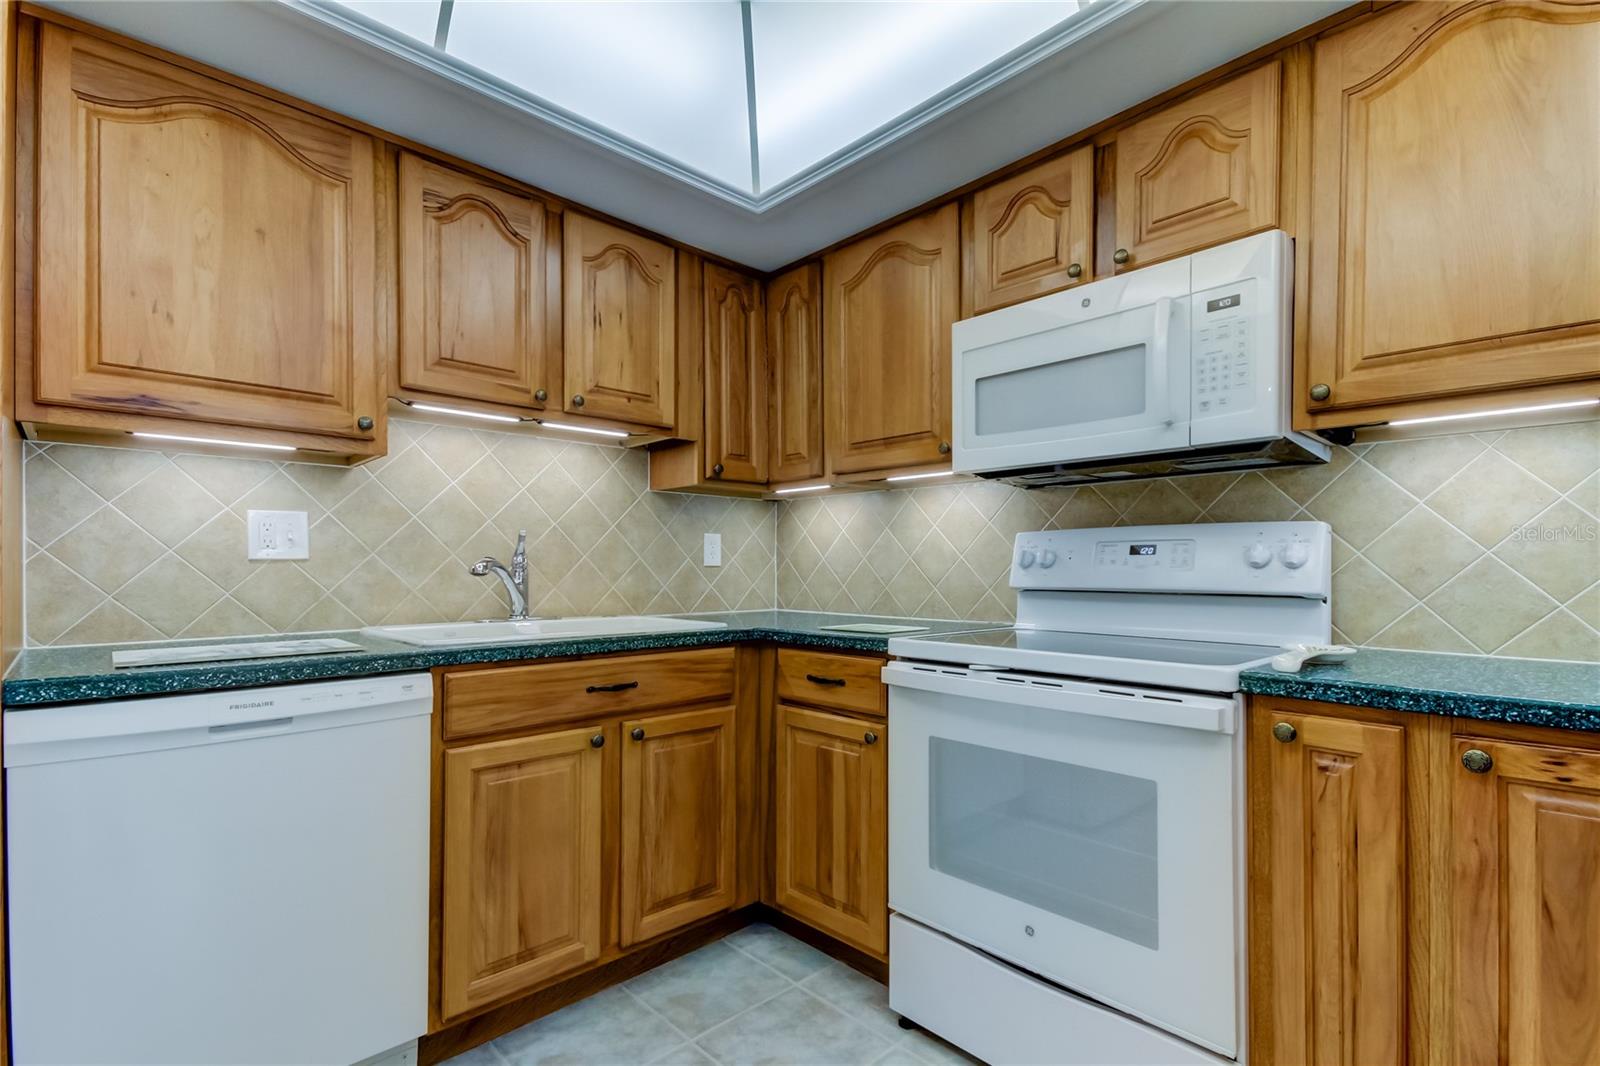 Tasteful Solid Maple Wood Cabinetry & Newer White Appliances in Kitchen!